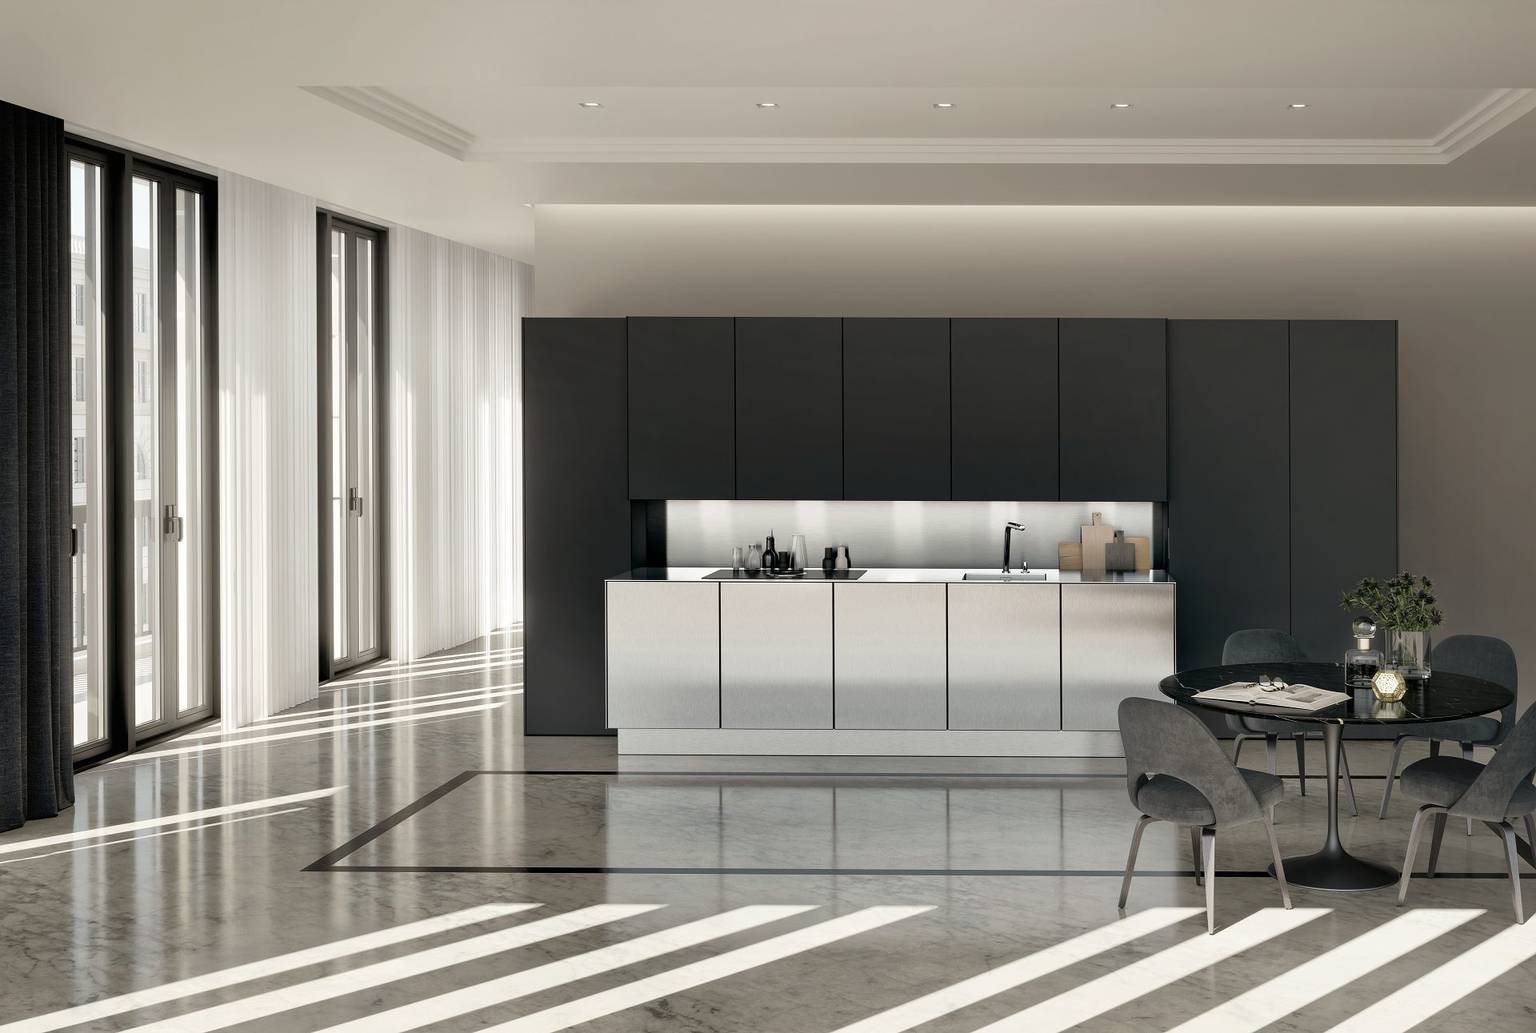 SieMatic Pure SE kitchen with tall and wall cabinets in graphite grey matte lacquer as well as base cabinets in stainless steel